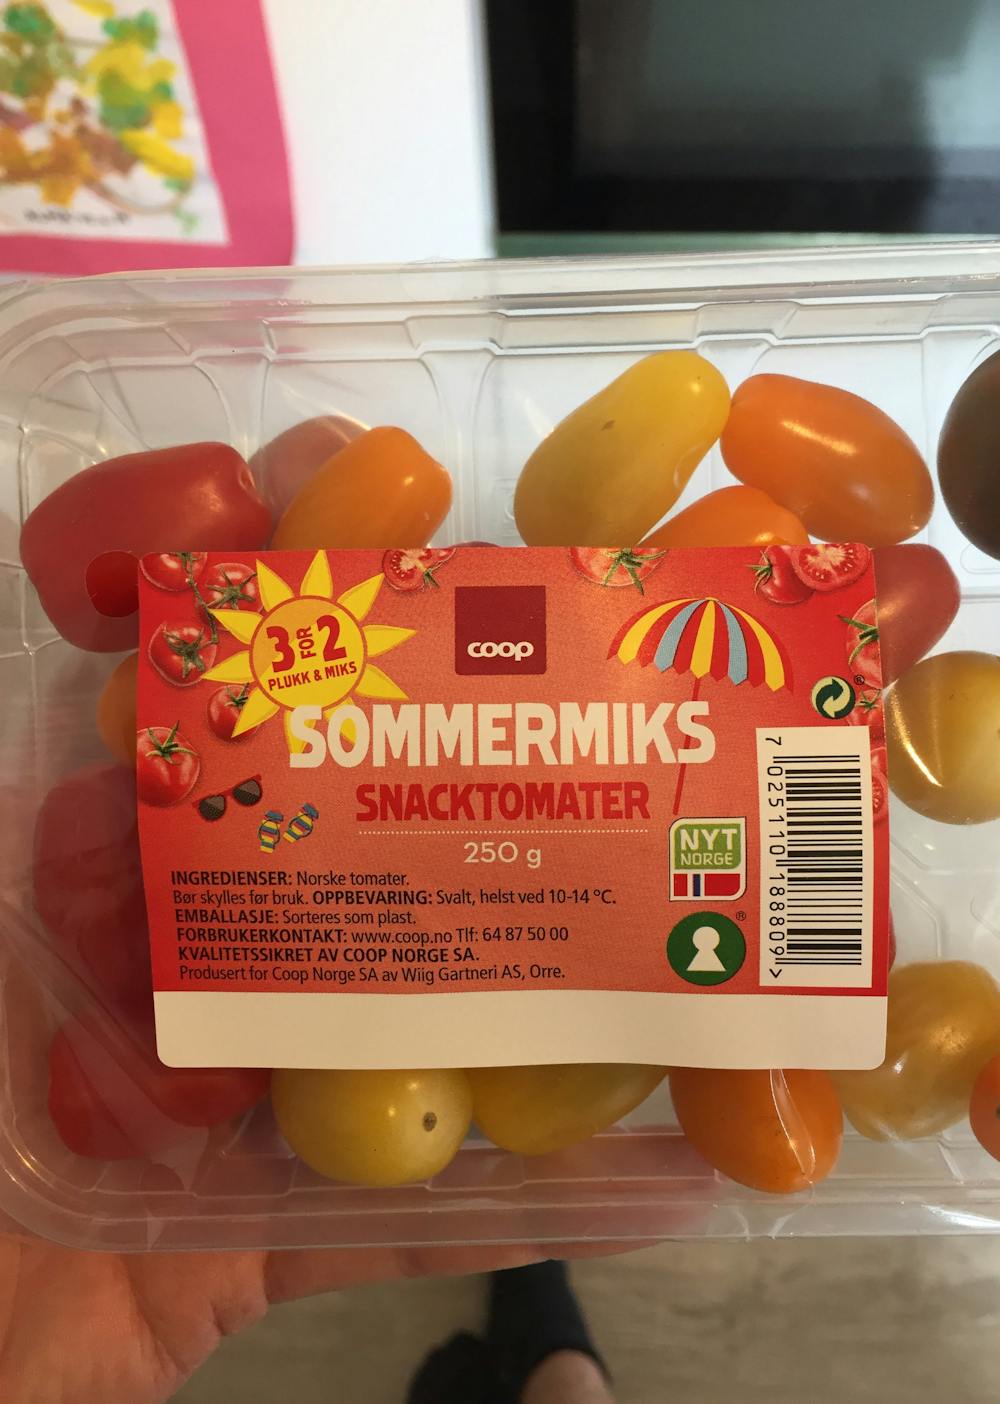 Sommermiks snacktomater, Coop